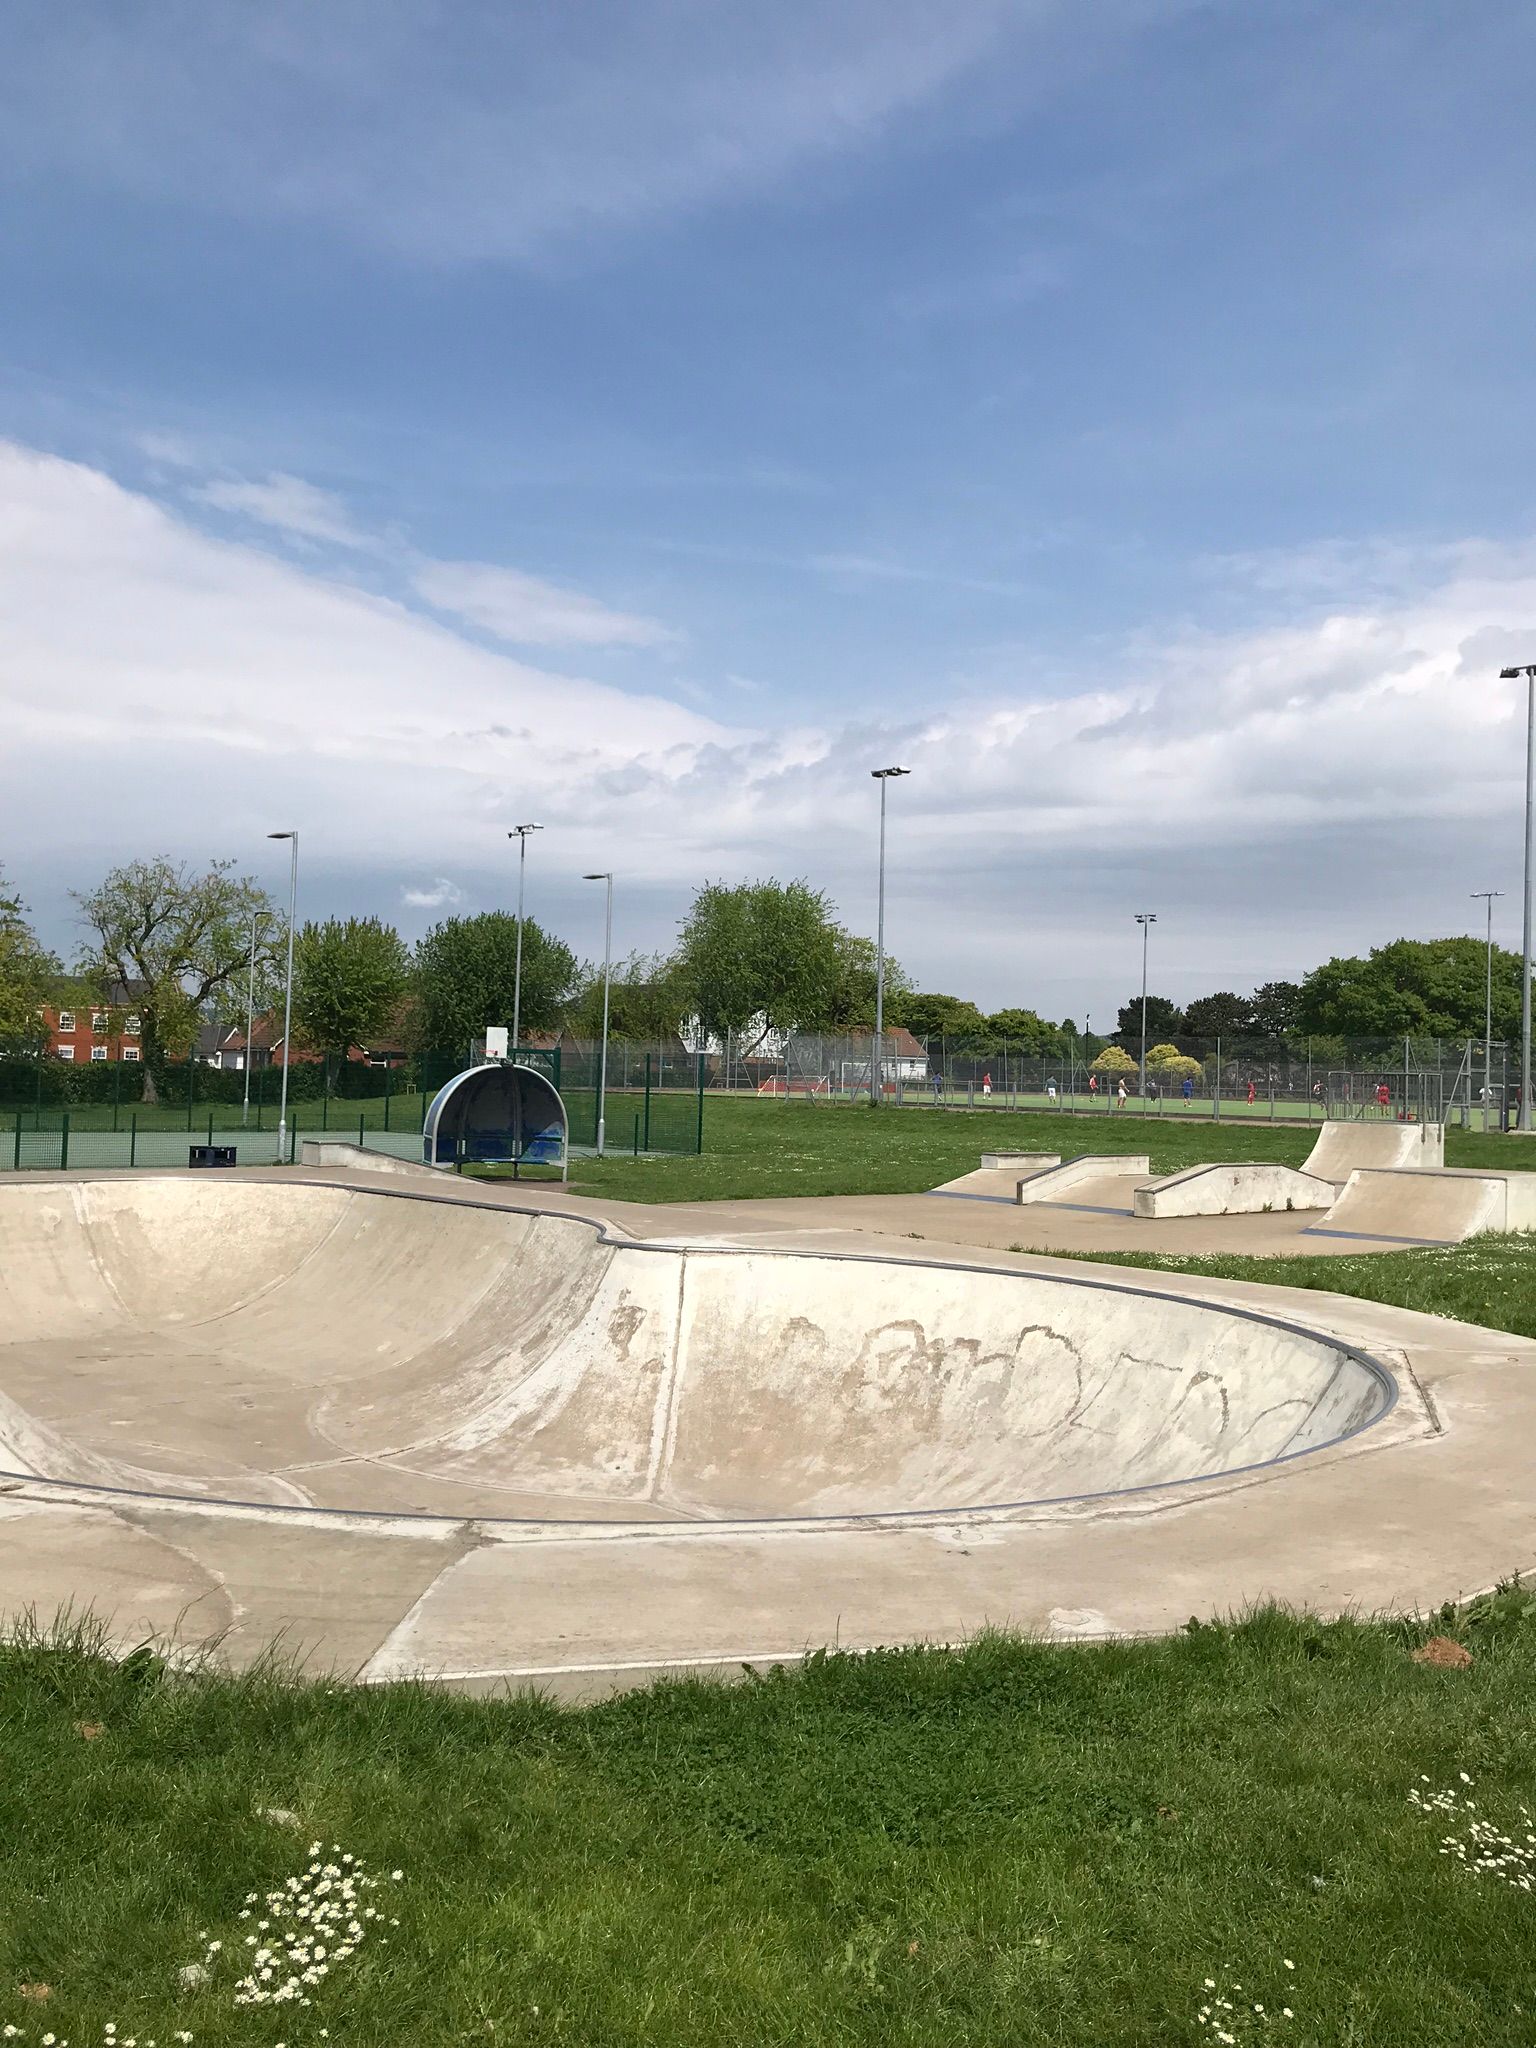 Skate park, multi-use court and hockey pitch